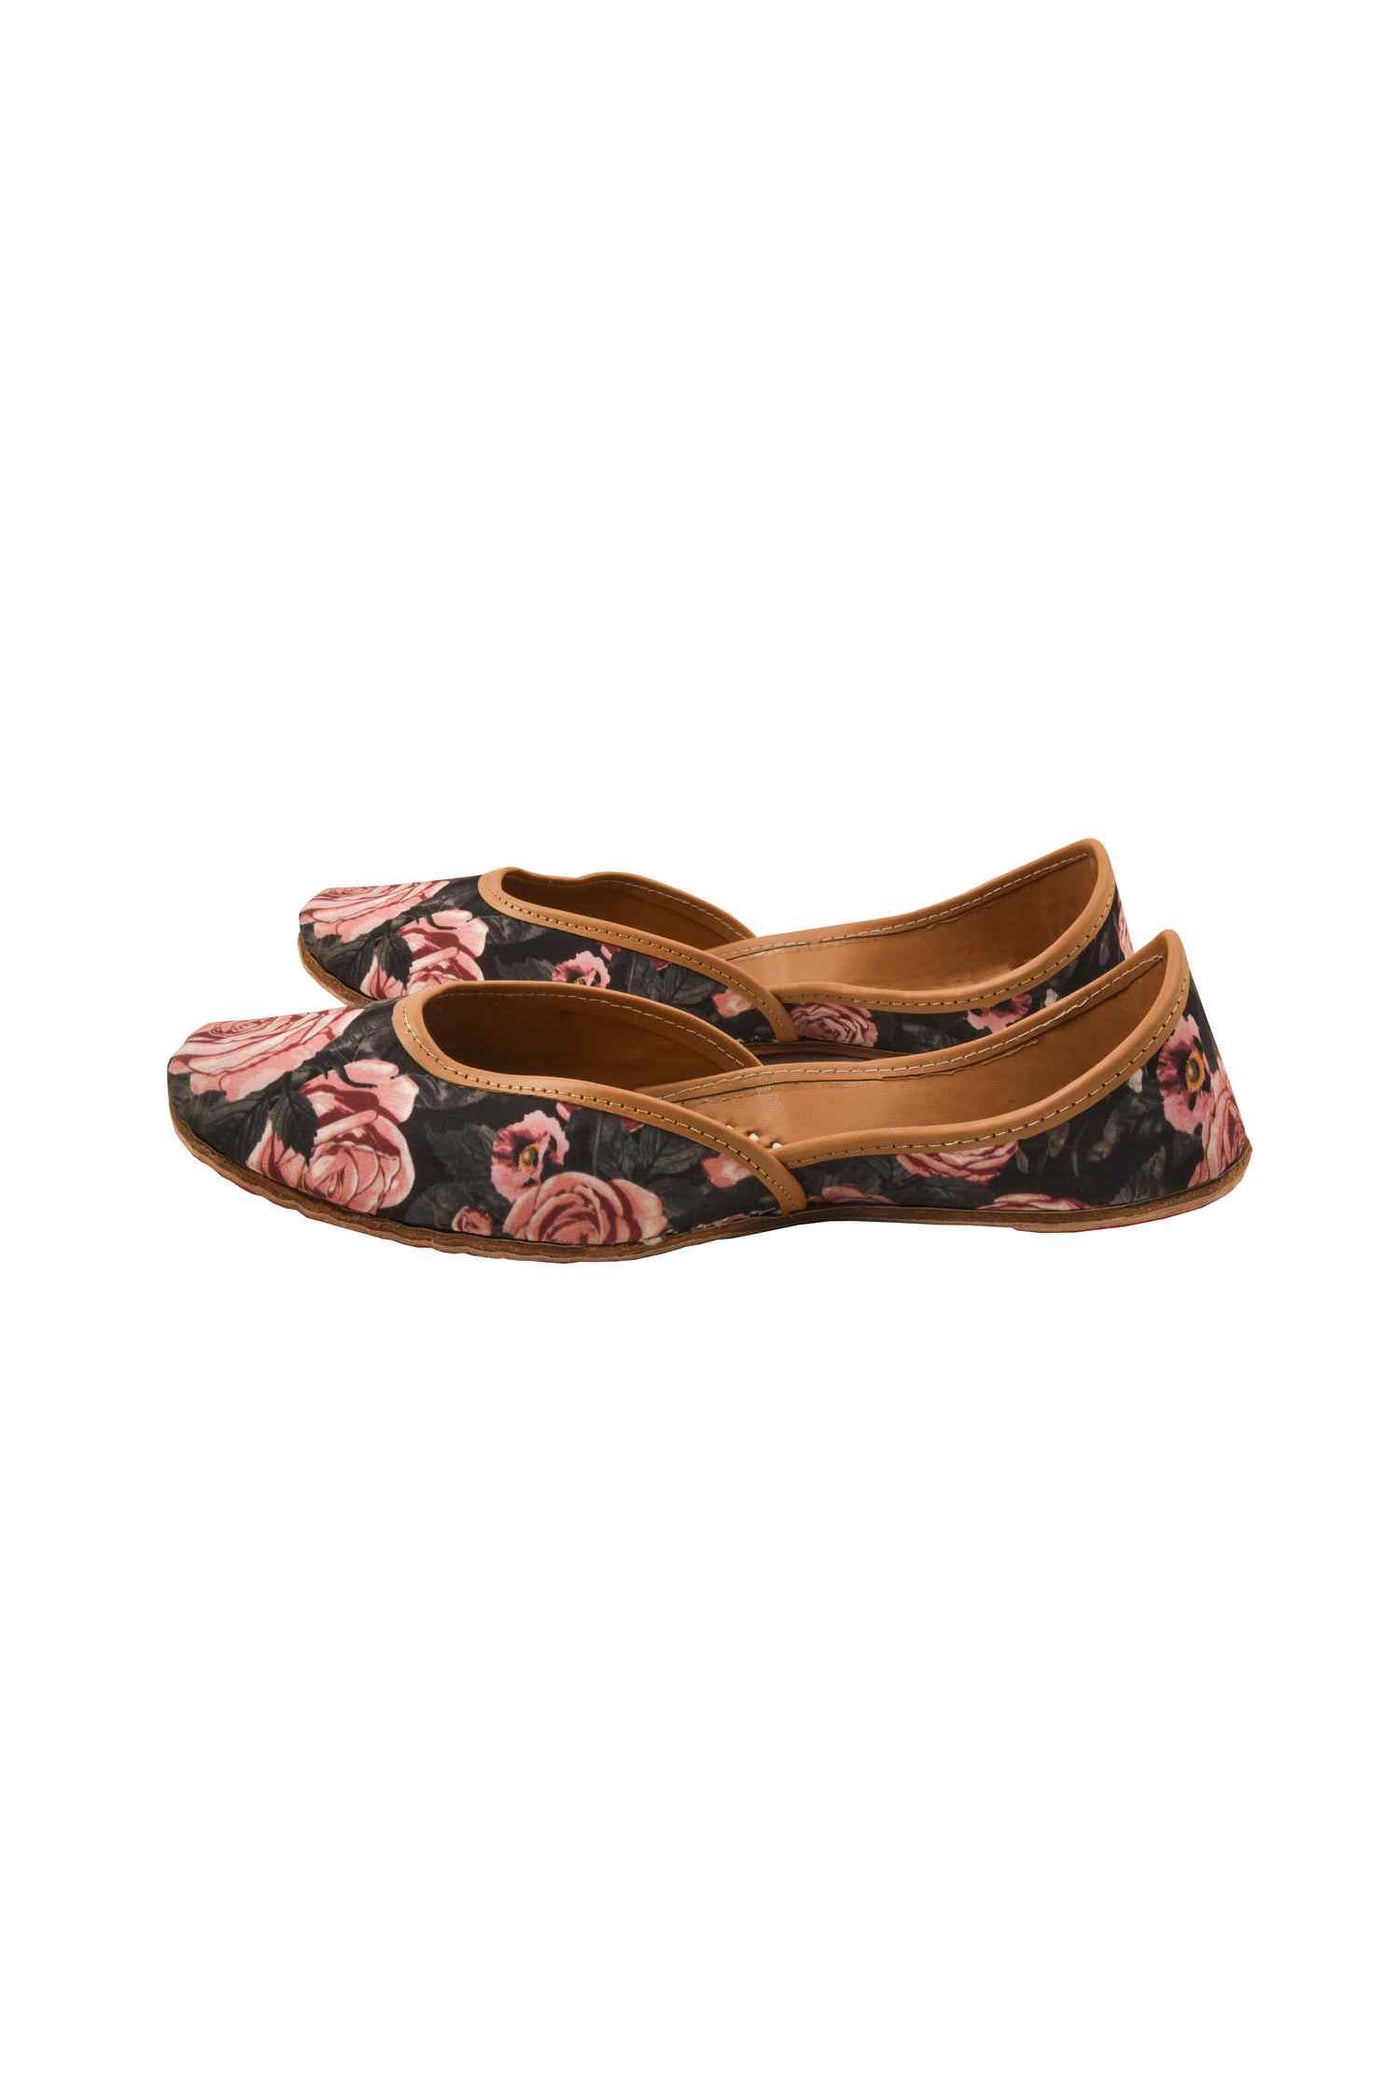 Black and apink Floral Printed Jutti